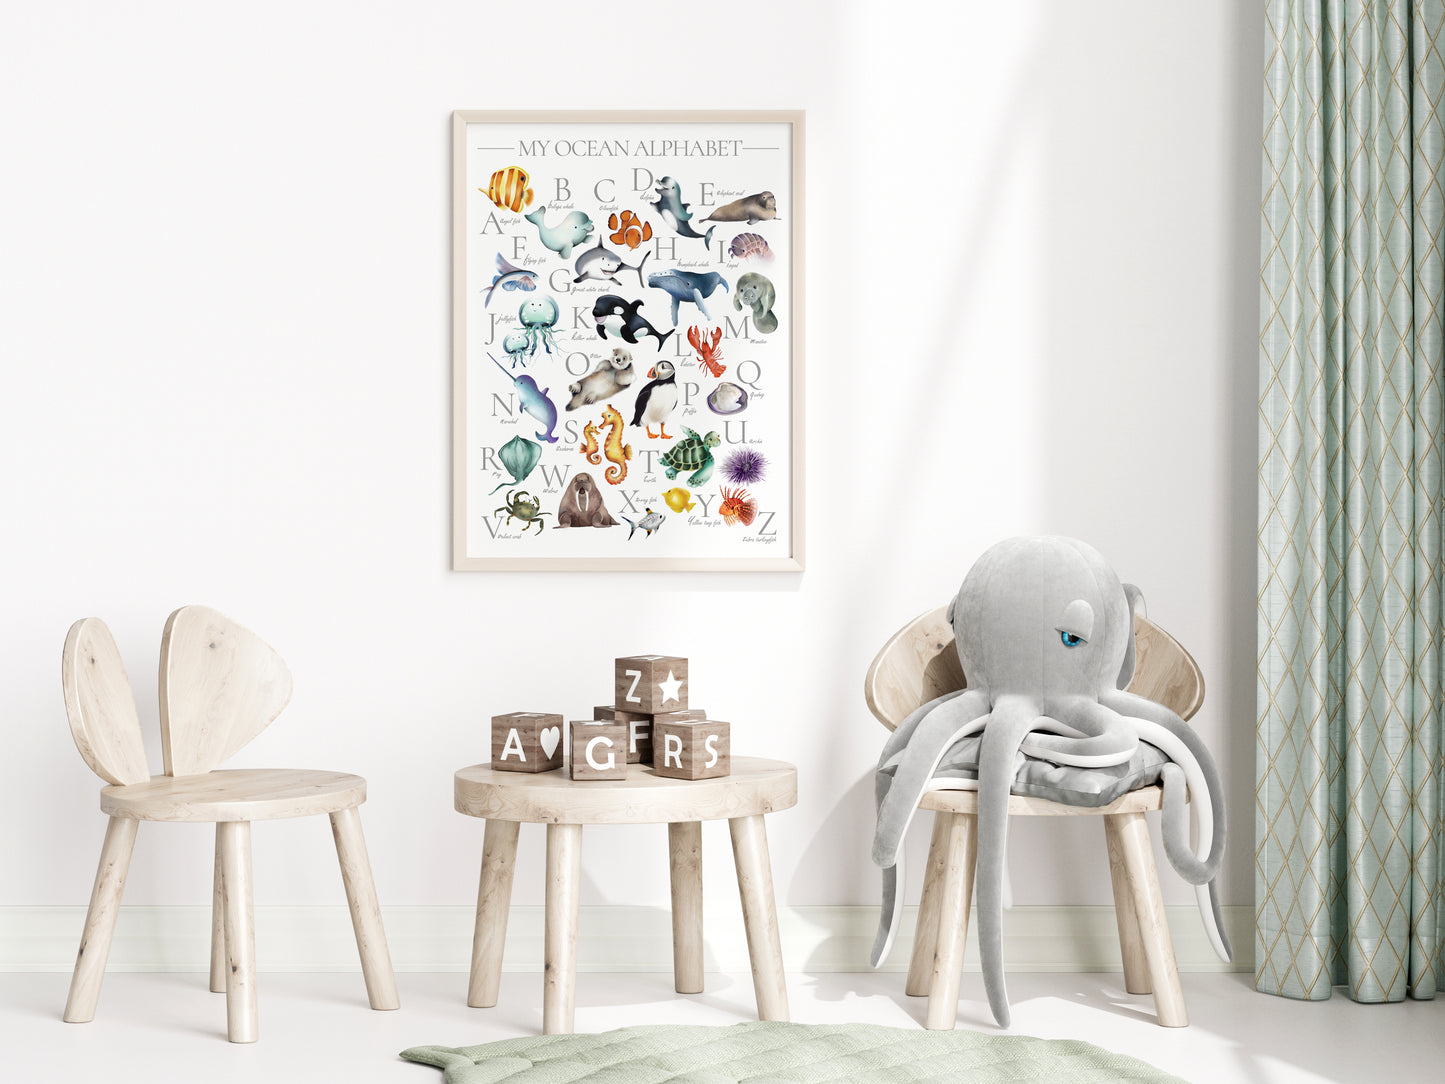 Colorful ocean animal alphabet print for kids with underwater animals from A thru Z framed in a light wood frame hanging on a wall in a kids bedroom- Studio Q - Art by Nicky Quartermaine Scott